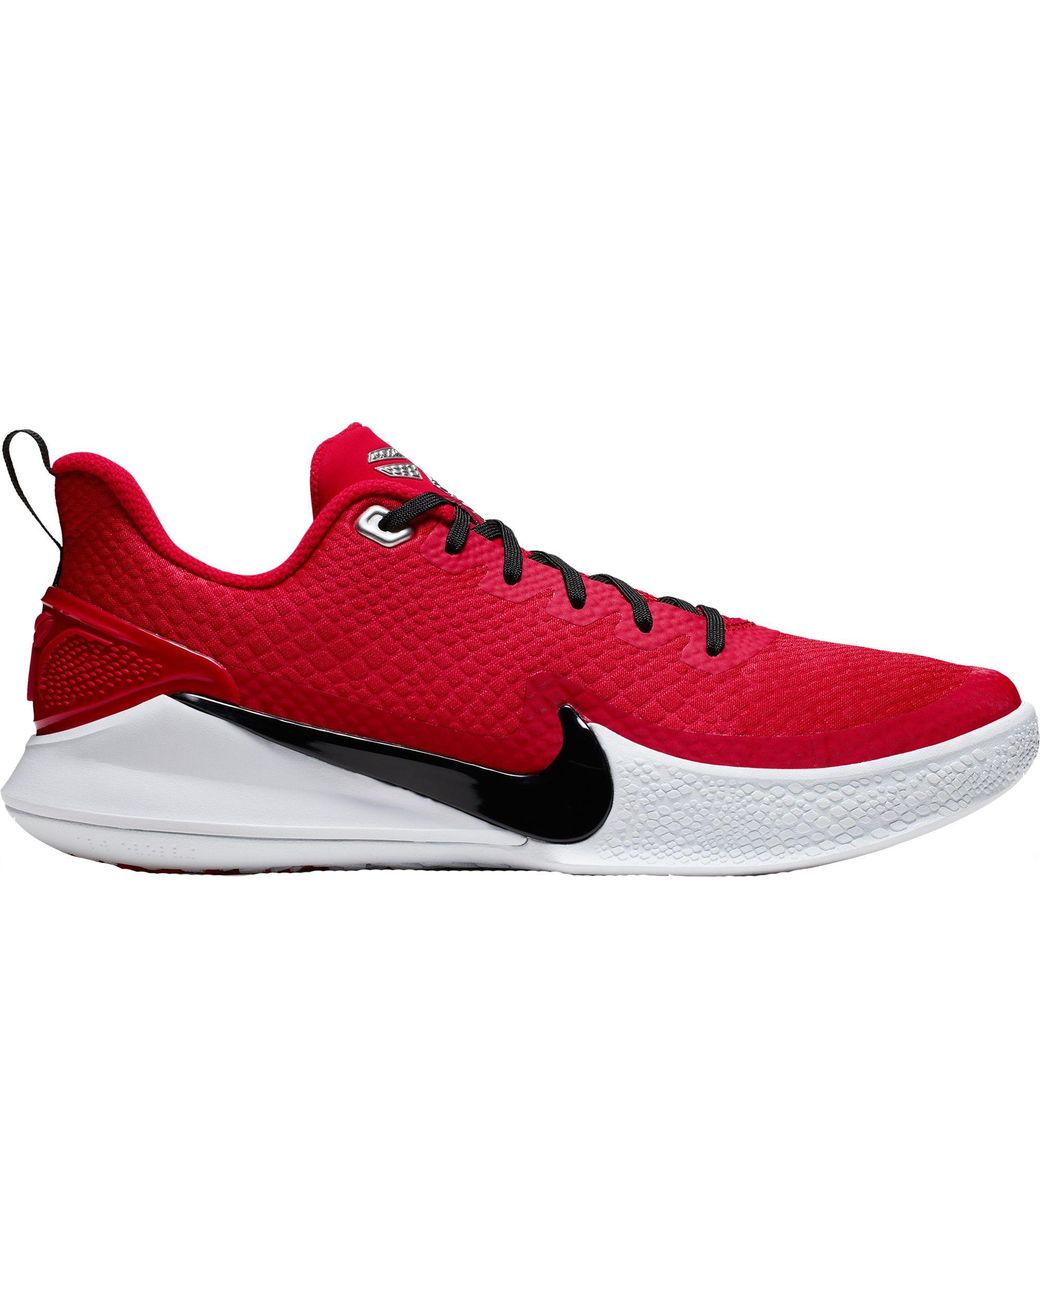 mamba red shoes